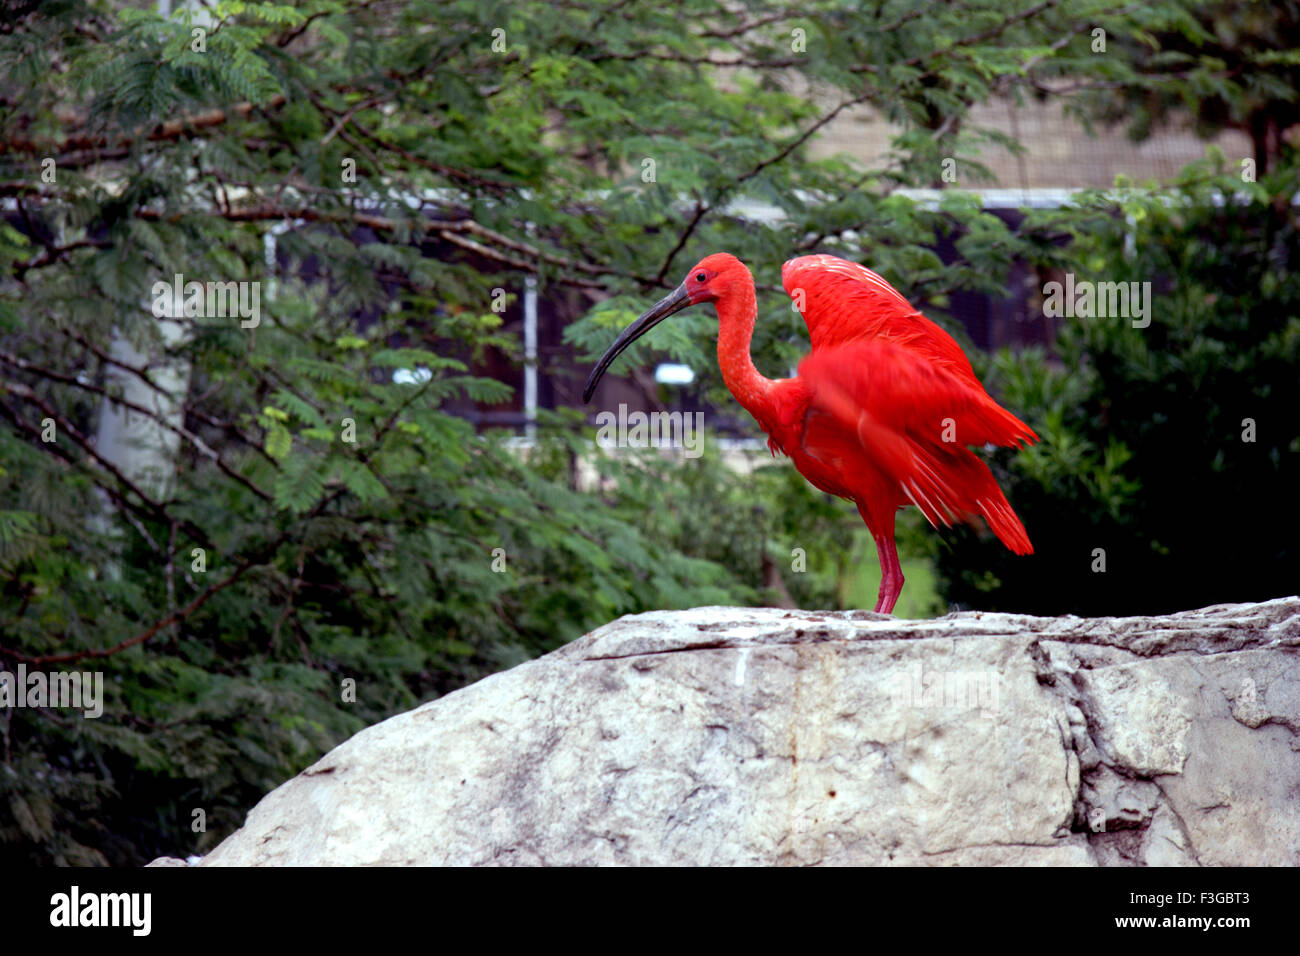 Beautiful Bird Called Scarlet Ibis (Eudocimus rubber) Seen in South Africa Stock Photo